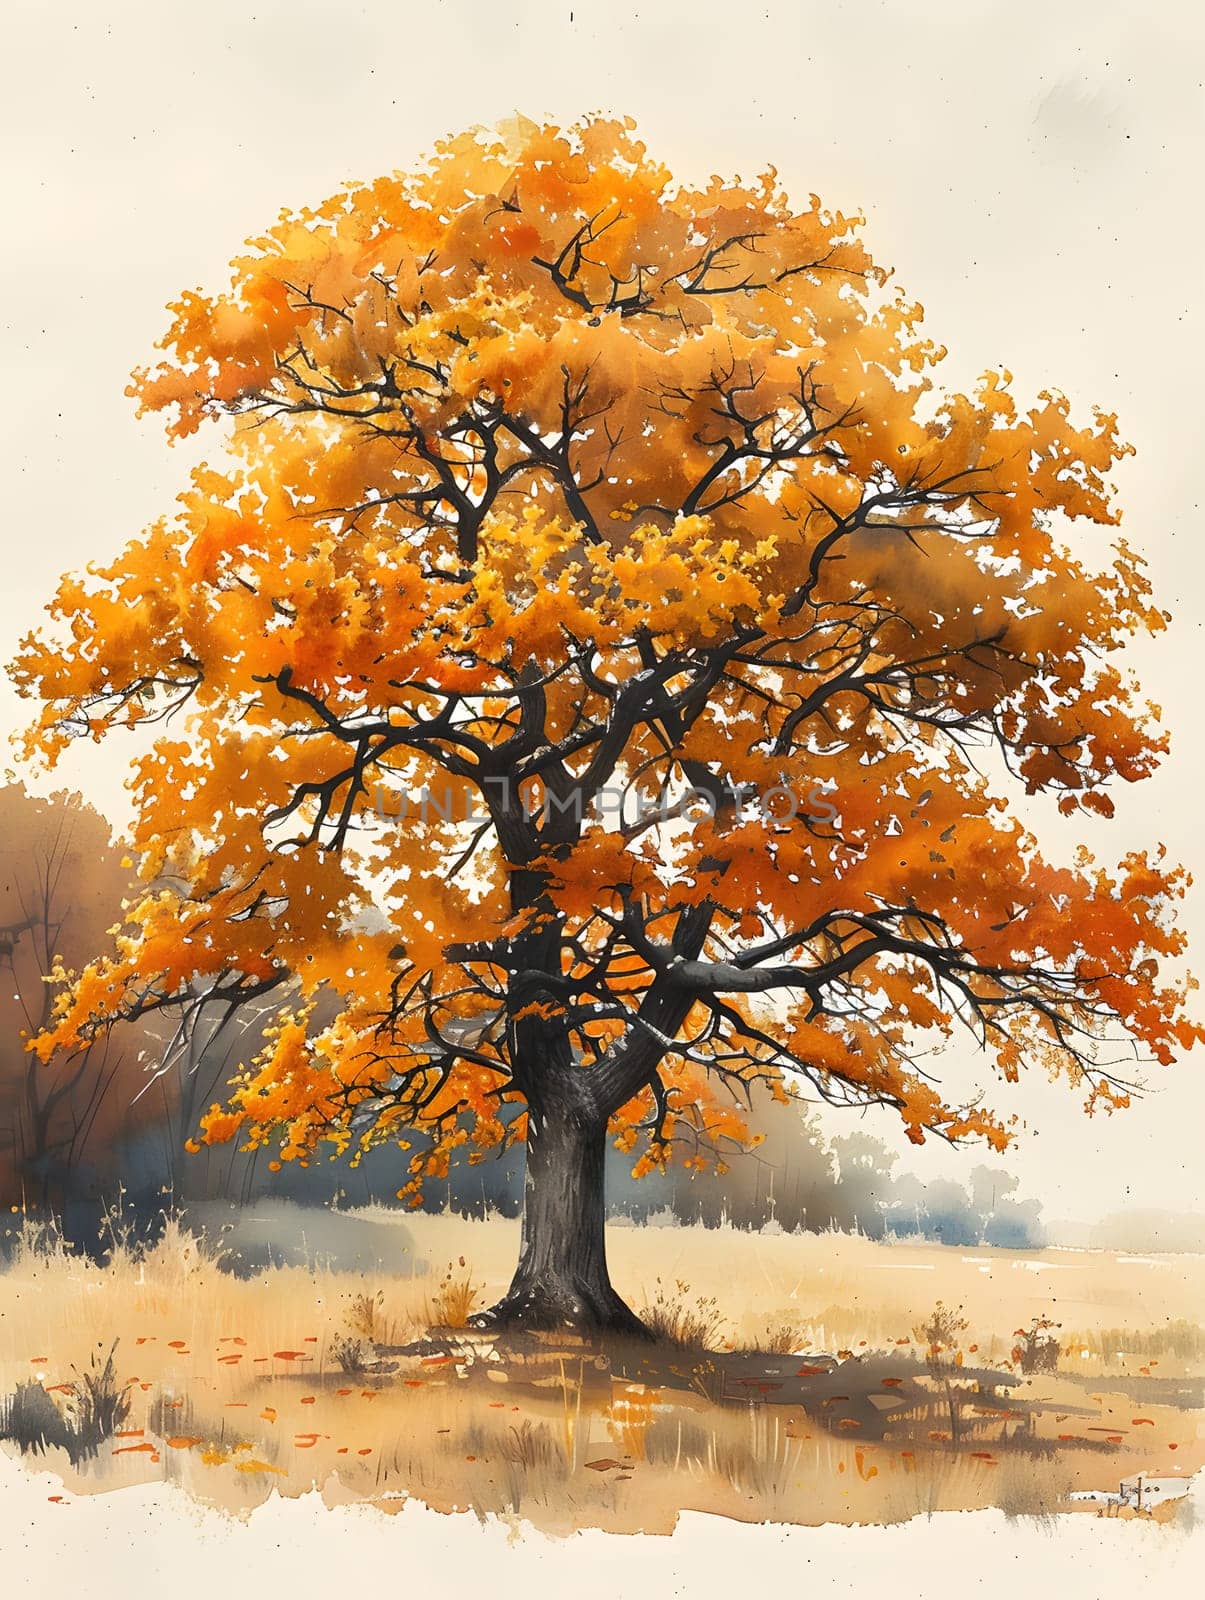 Artistic depiction of a deciduous tree with orange leaves in a natural landscape by Nadtochiy